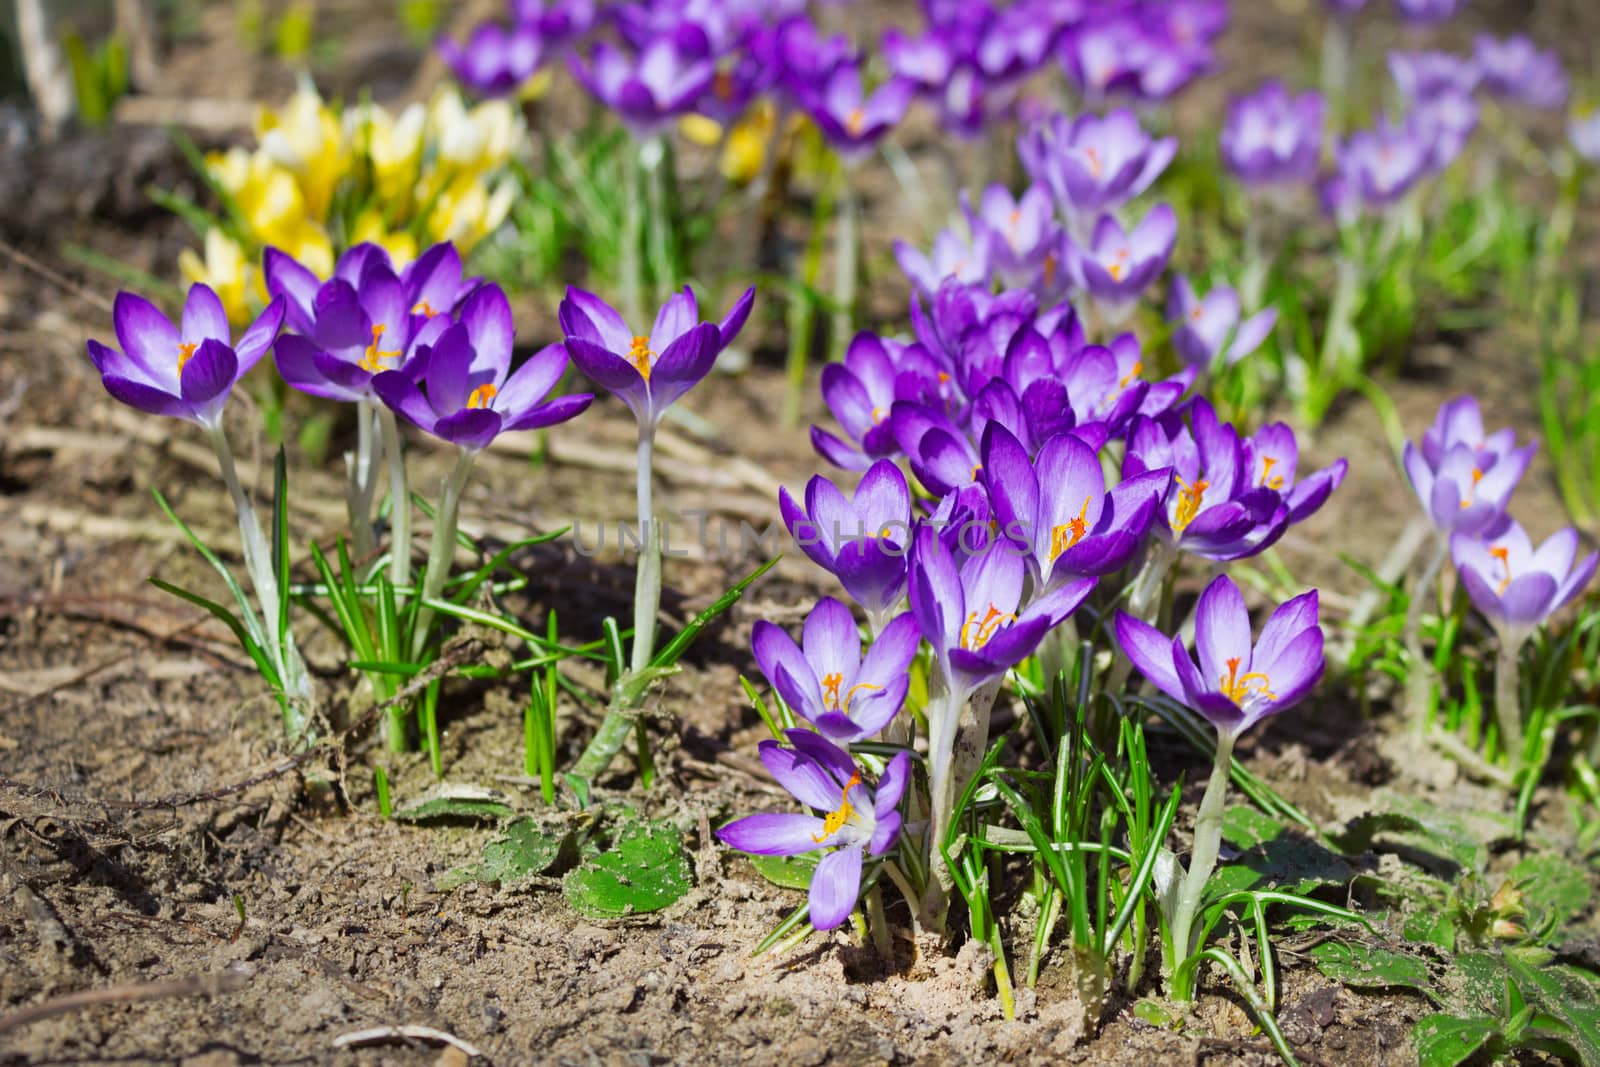 Yellow and purple crocuses in the spring